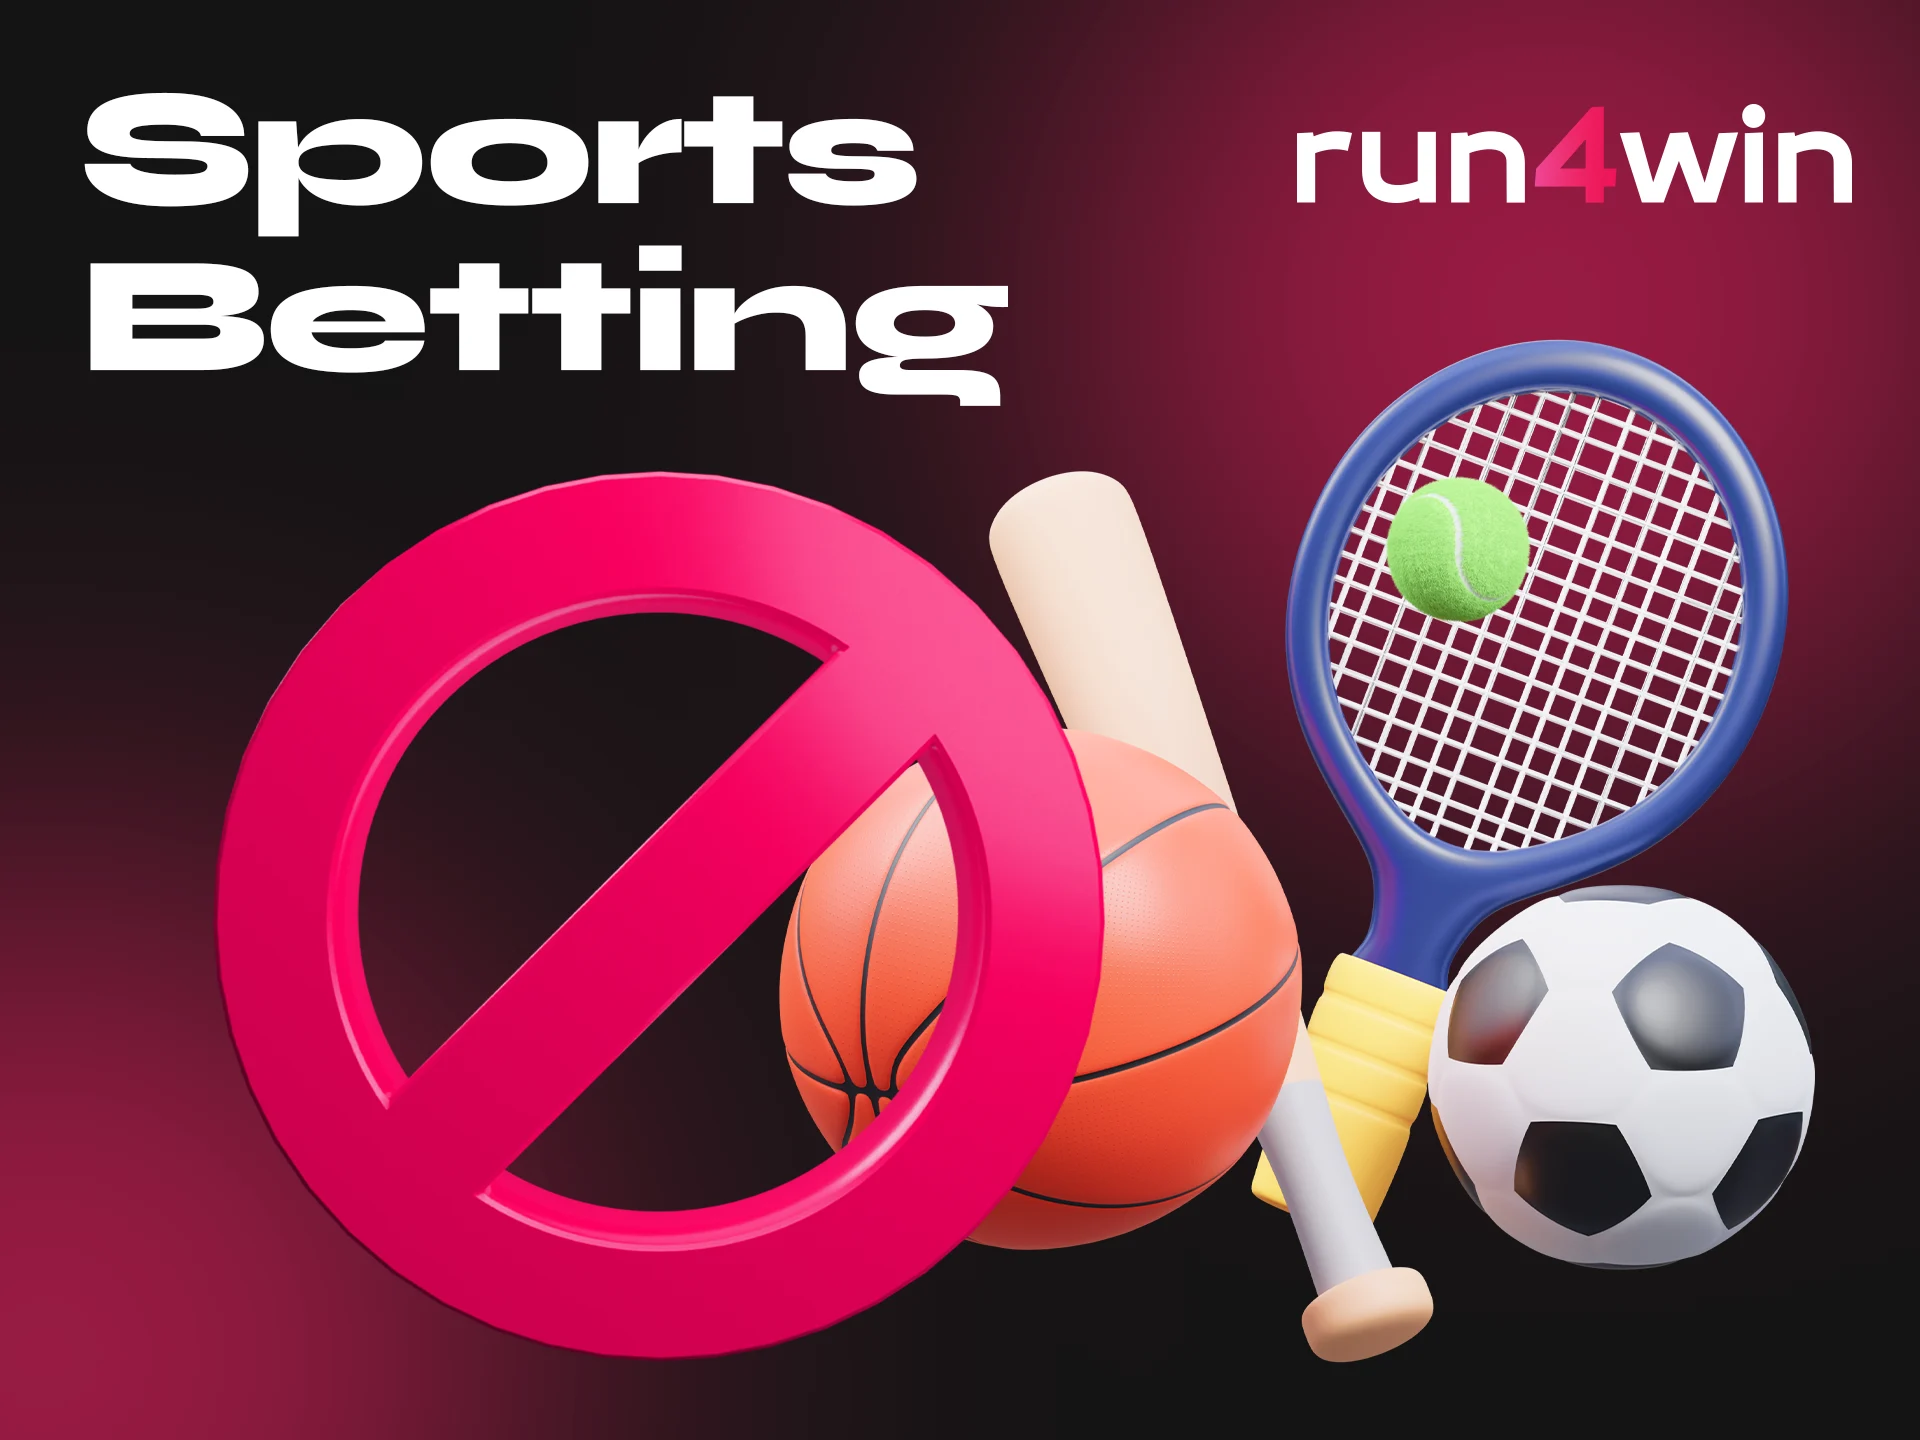 There is no sports betting section on Run4Win.